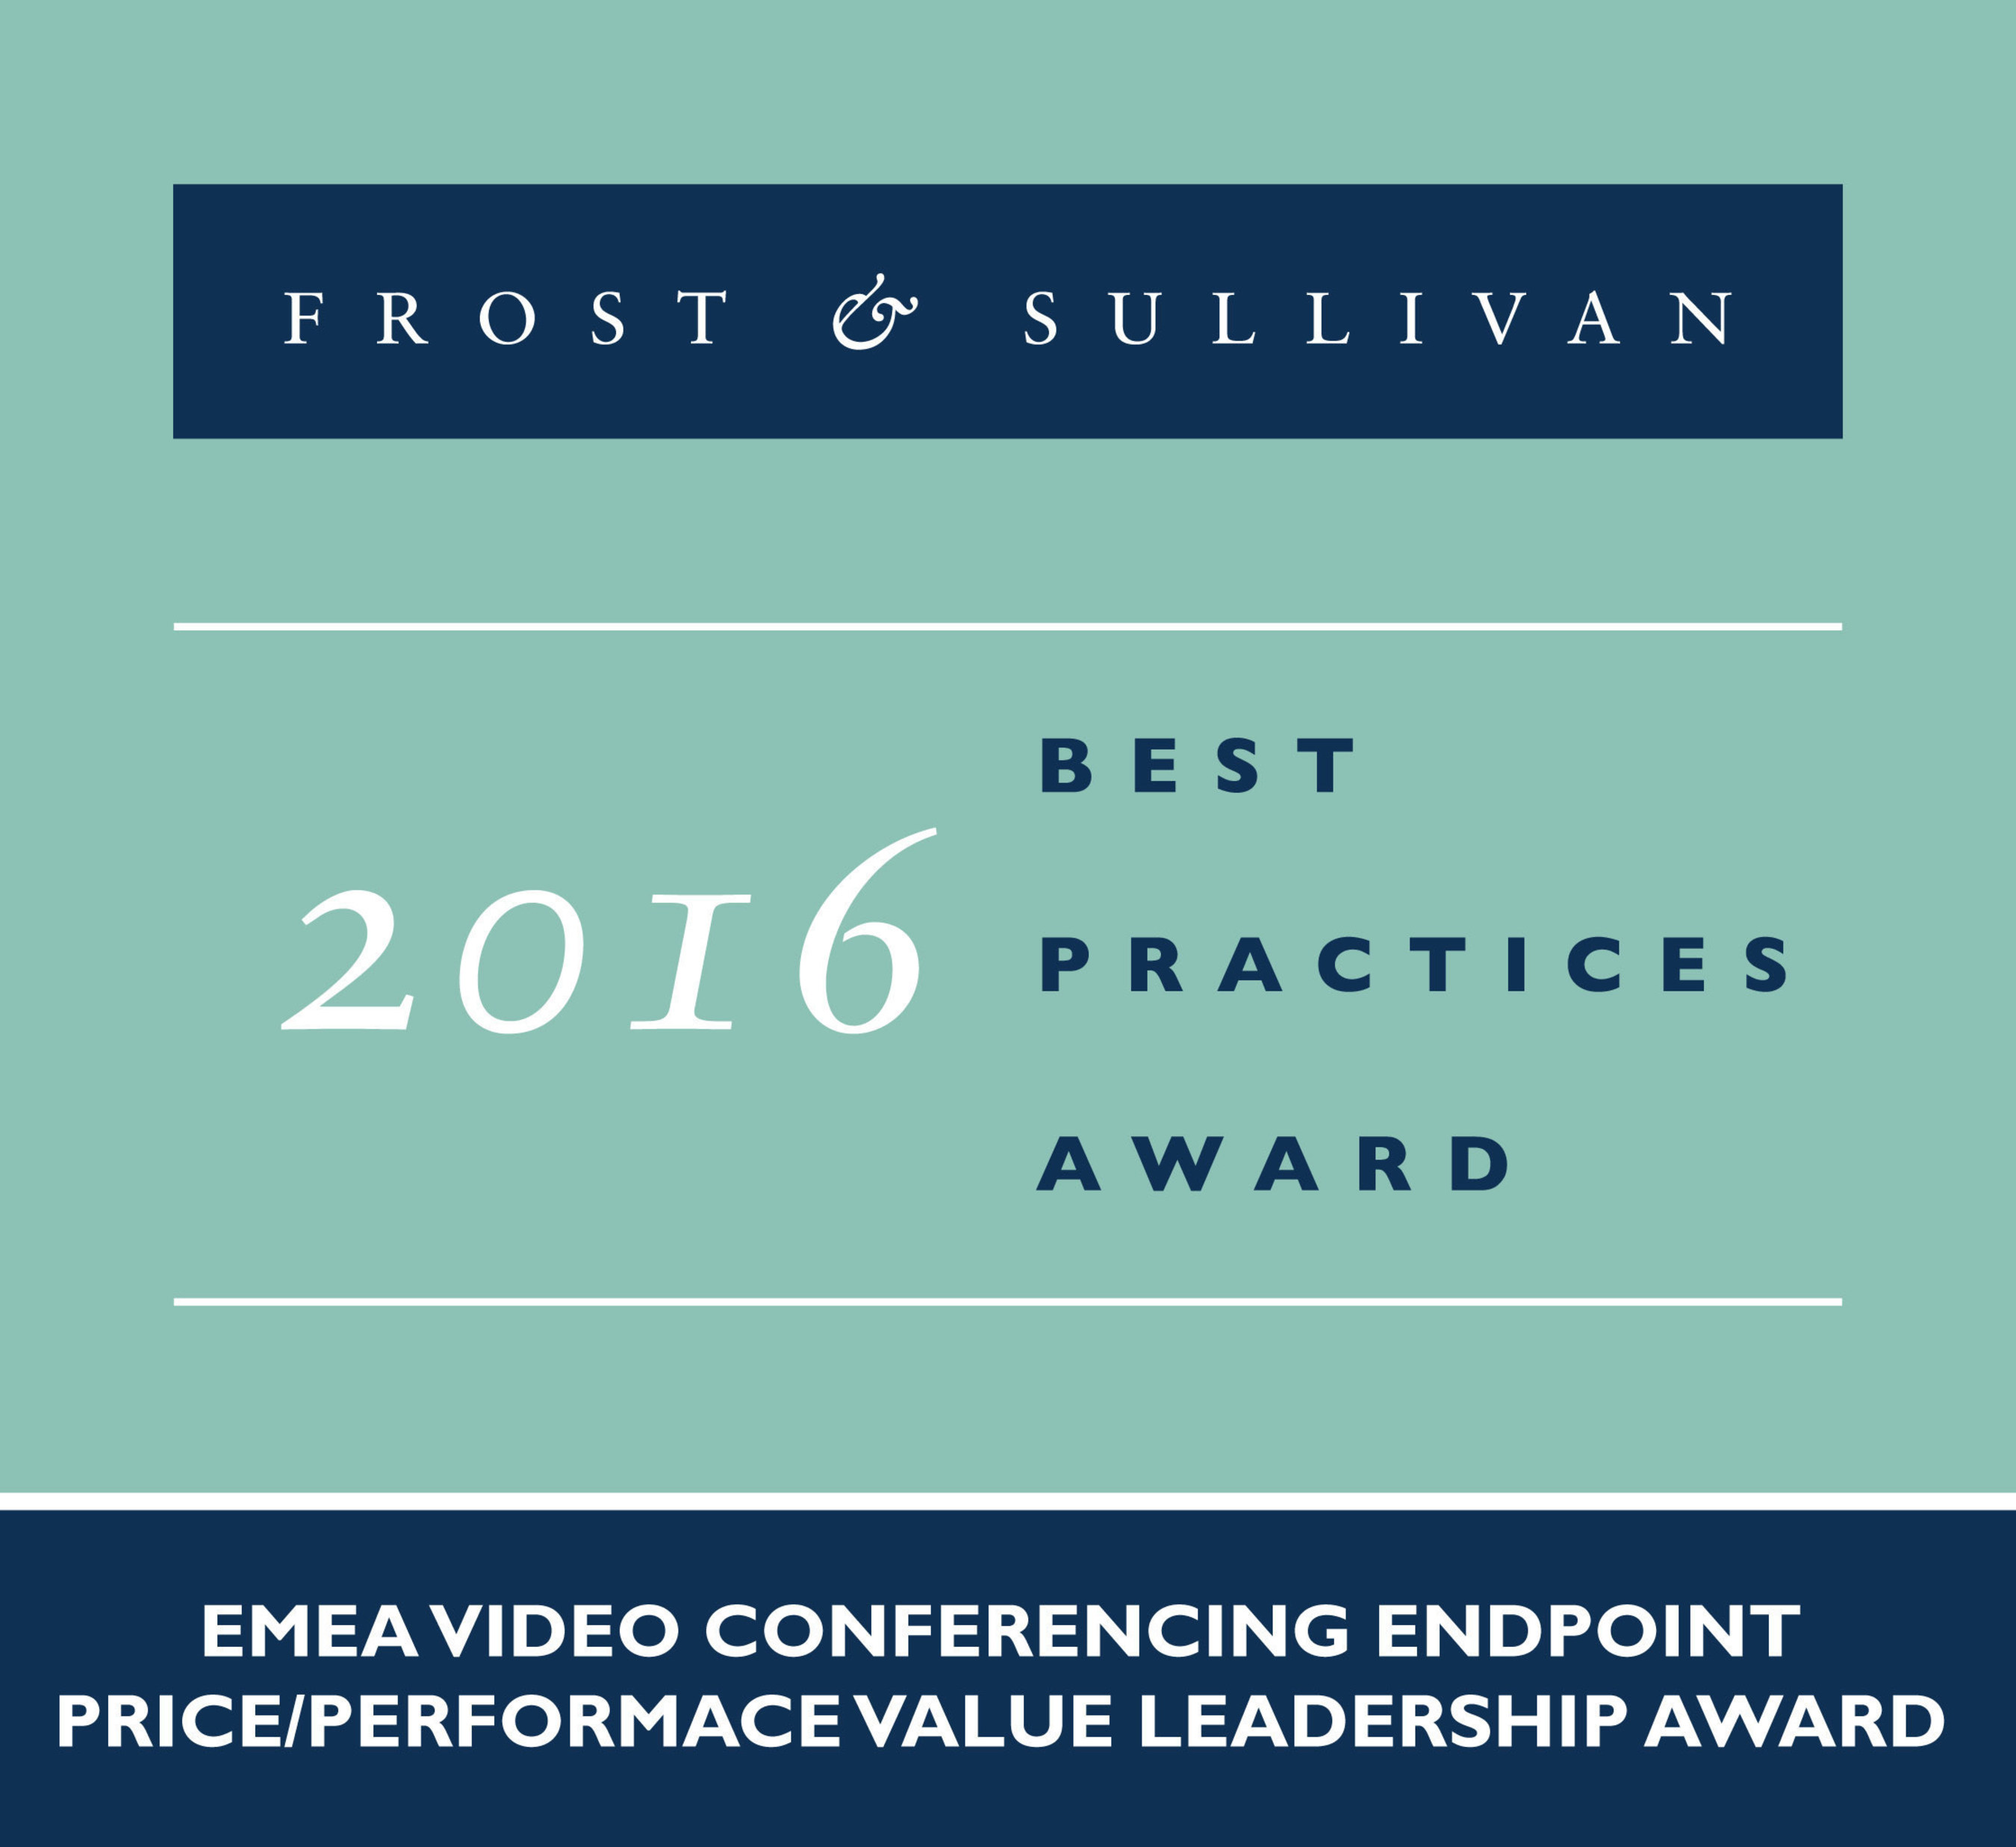 Tely Receives EMEA Video Conferencing Endpoint Price/Performance Value Leadership Award